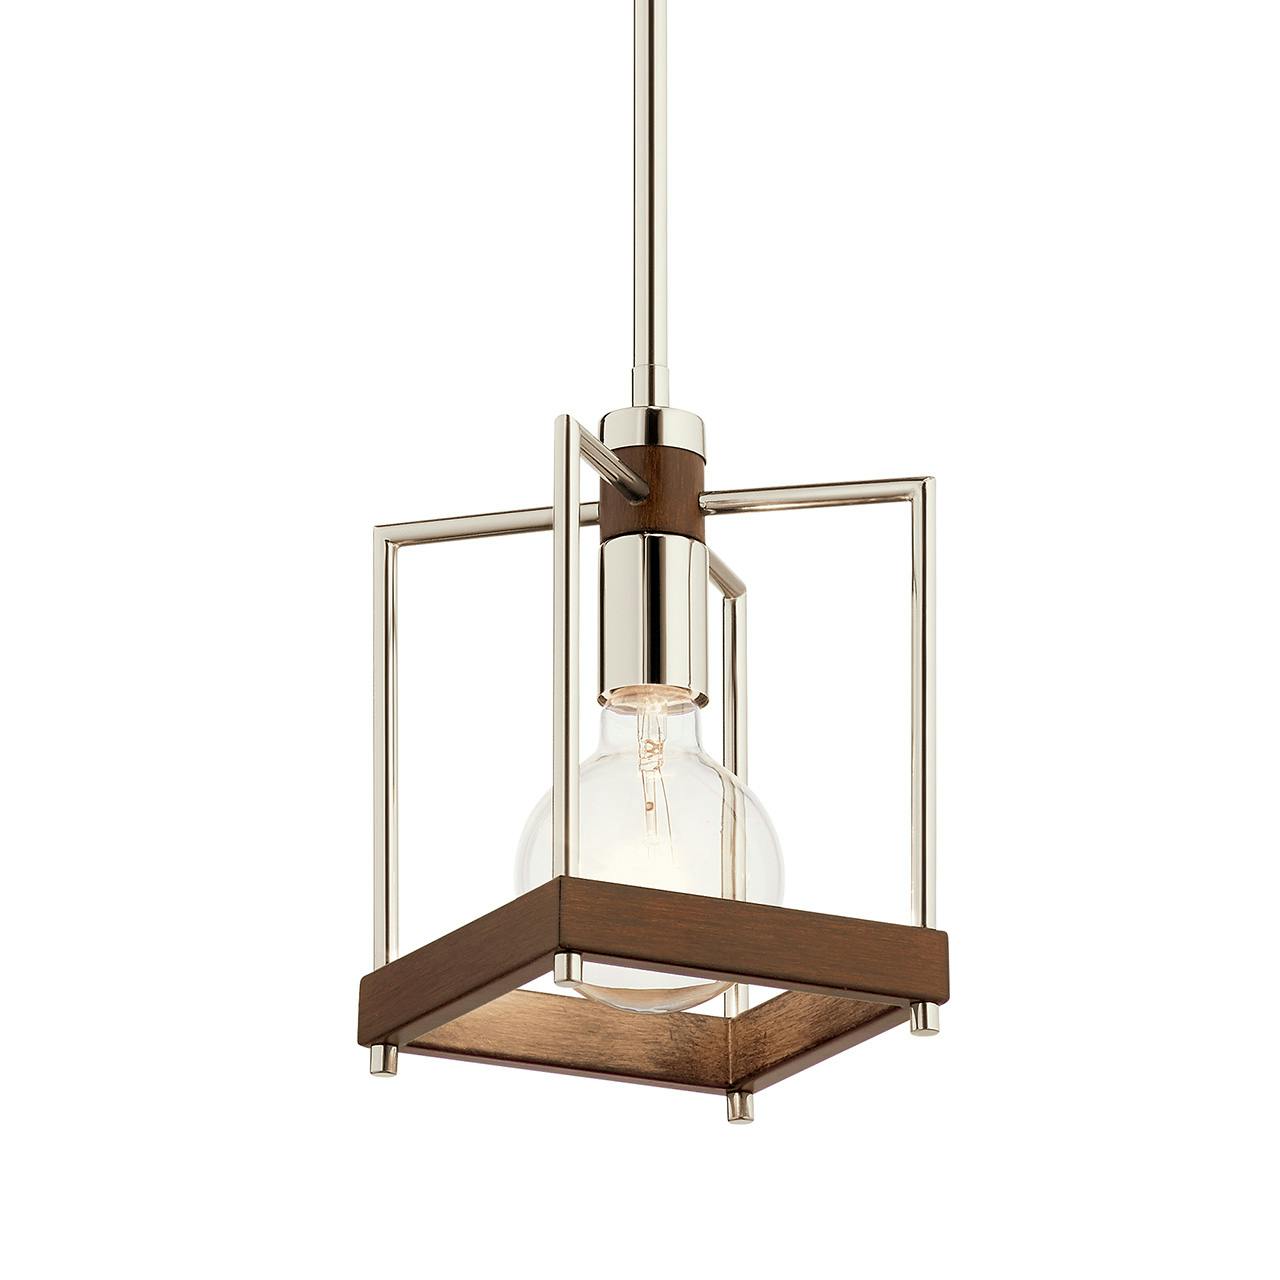 Tanis™ 1 Light Pendant Auburn Stained without the canopy on a white background